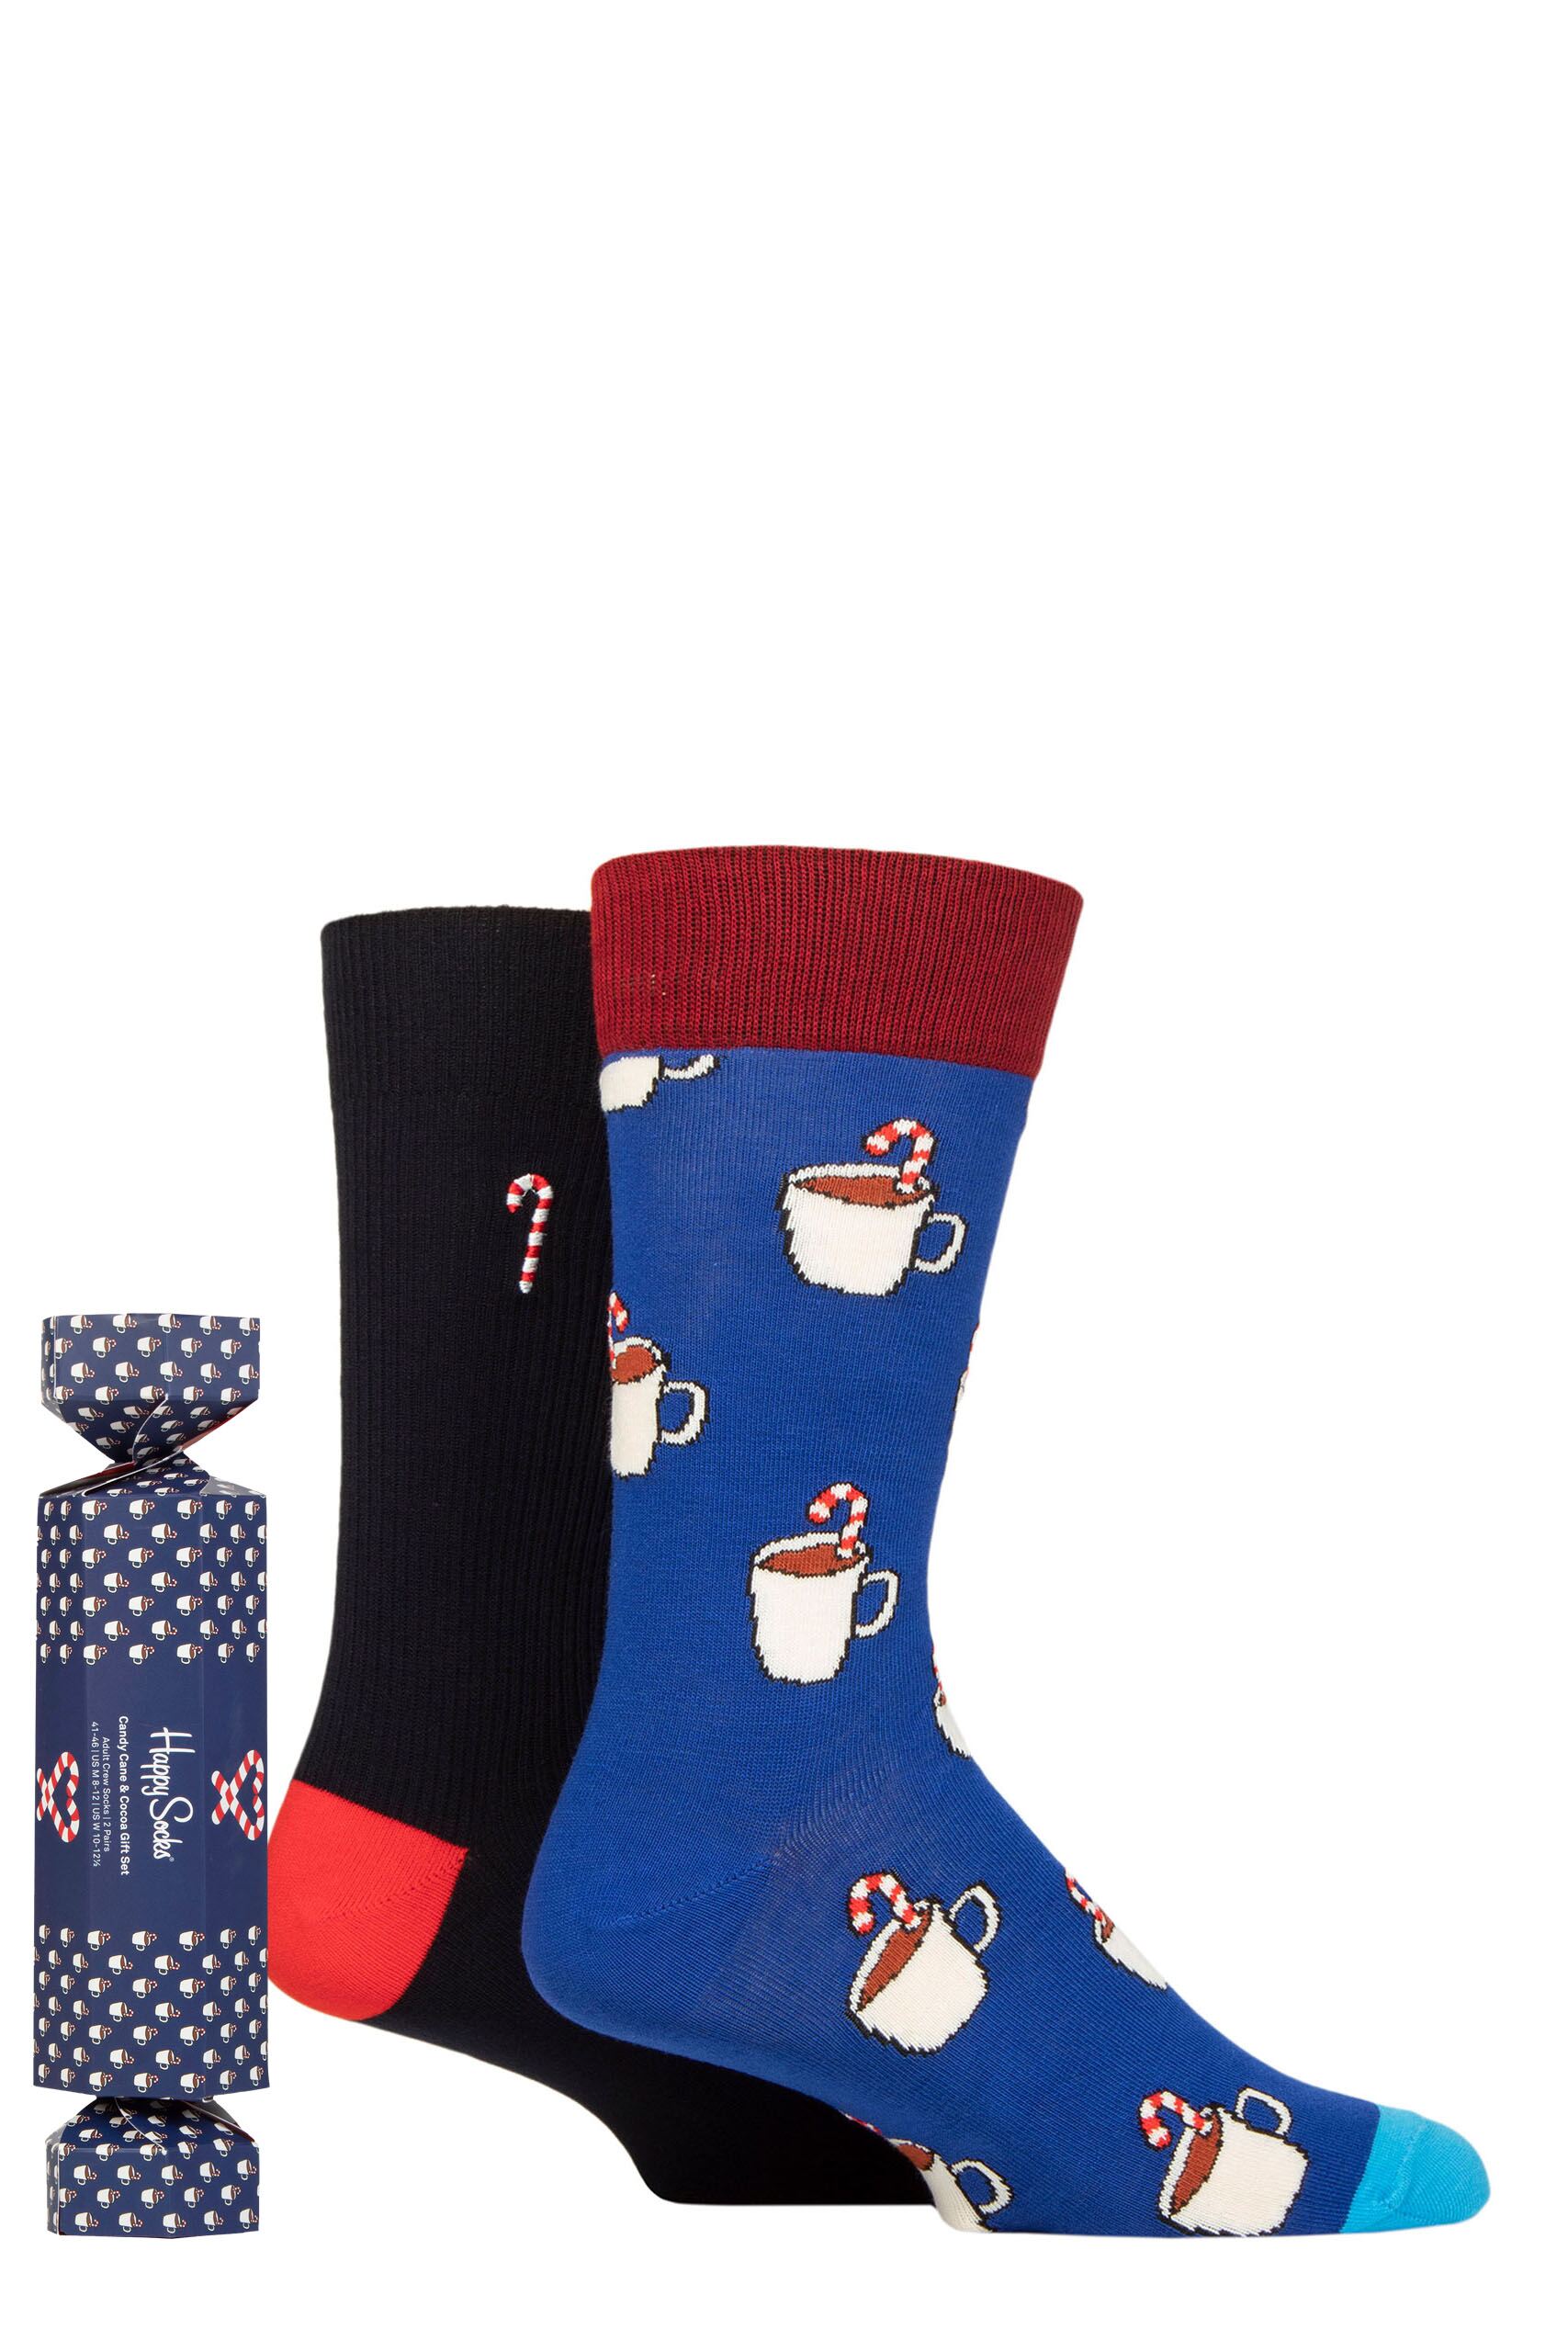 Mens and Ladies 2 Pair Happy Socks Candy Cane & Cocoa Gift Boxed Socks Multi 4-7 Unisex